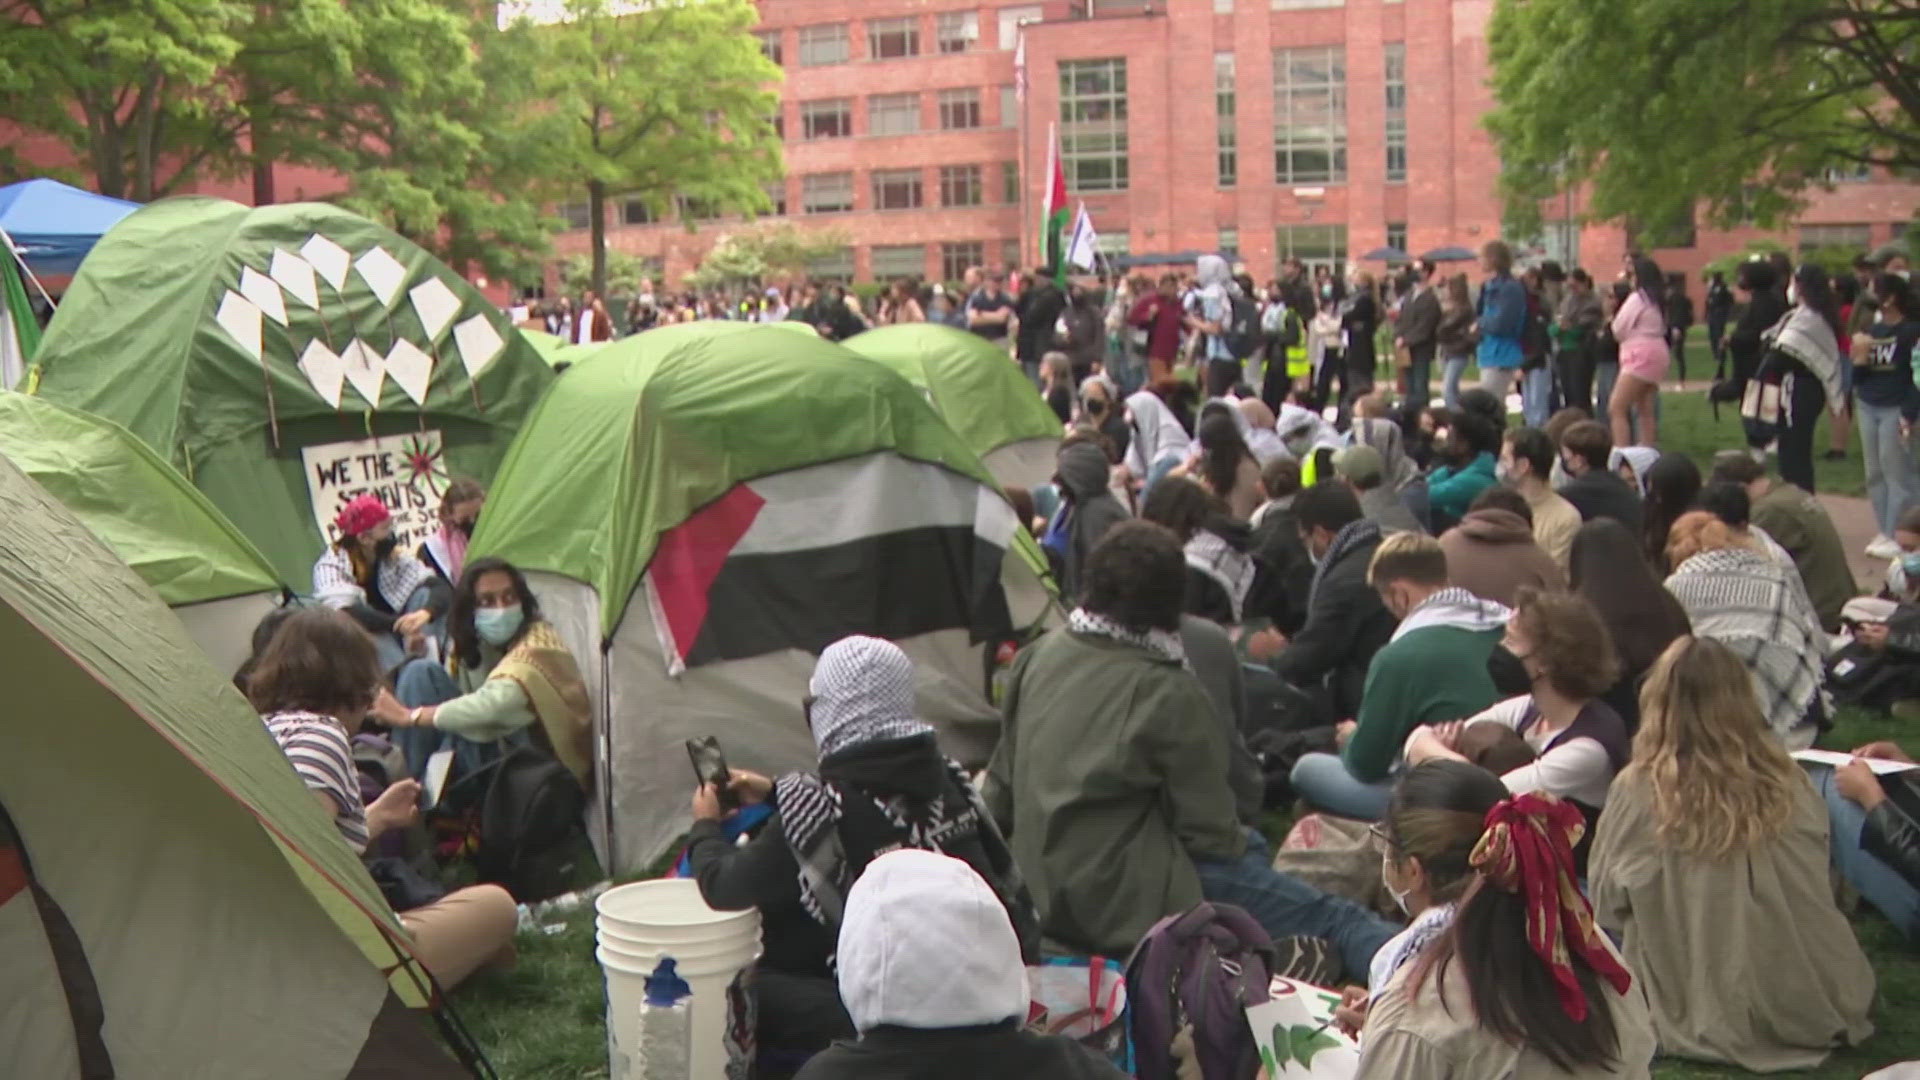 Protesters from several DMV universities converged on University Yard Thursday.